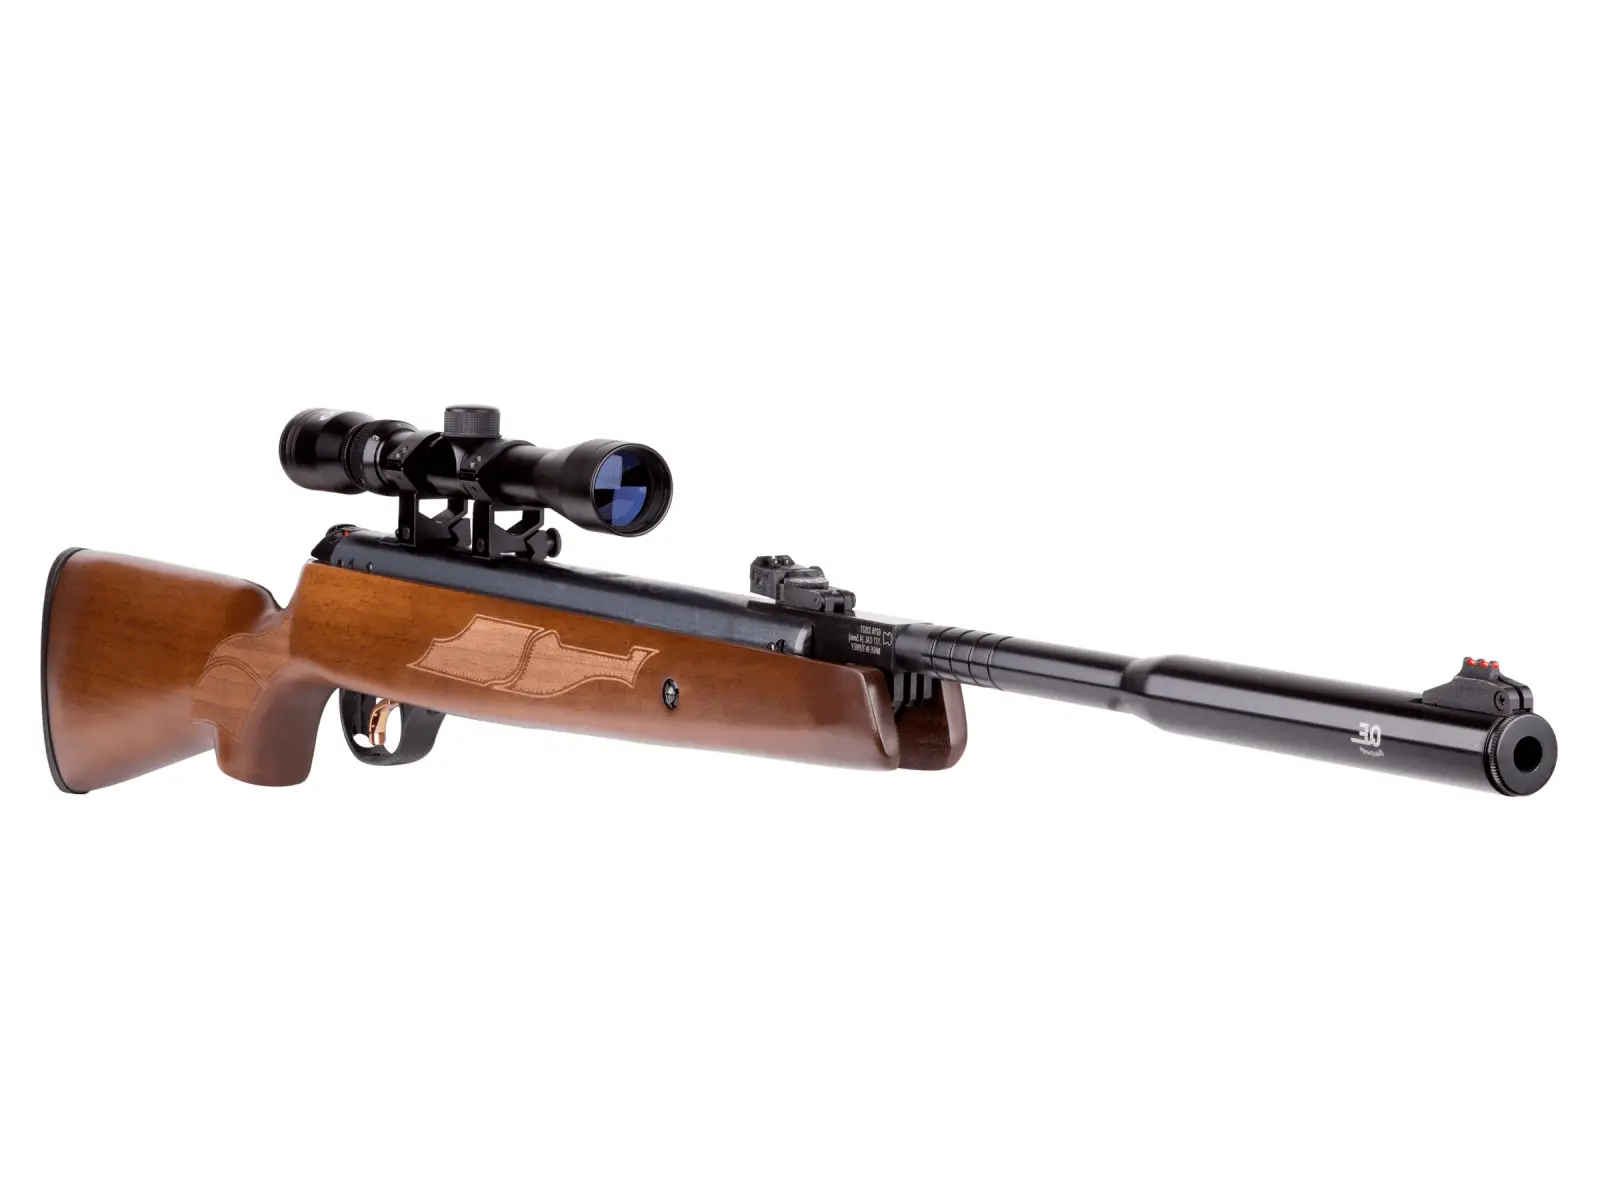 95 Best Air Rifles Under $200 - Top 5 budget guns for the money 2023 (Reviews and Buying Guide)